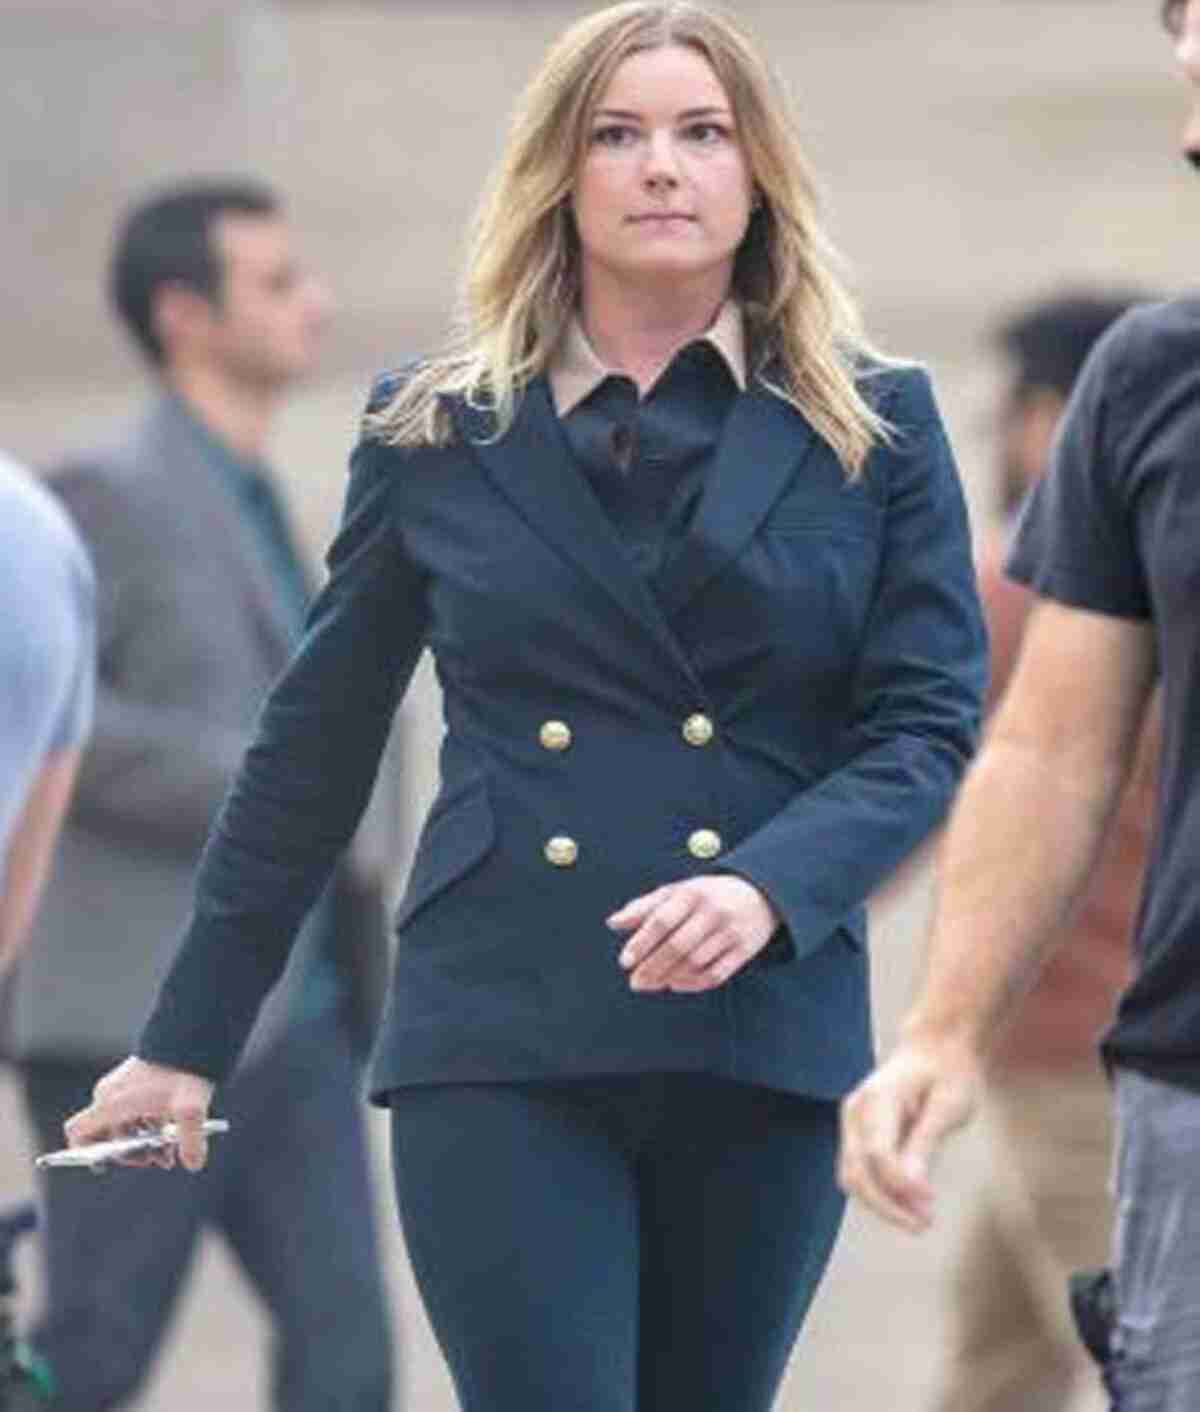 The Falcon and the Winter Soldier Emily VanCamp Coat front